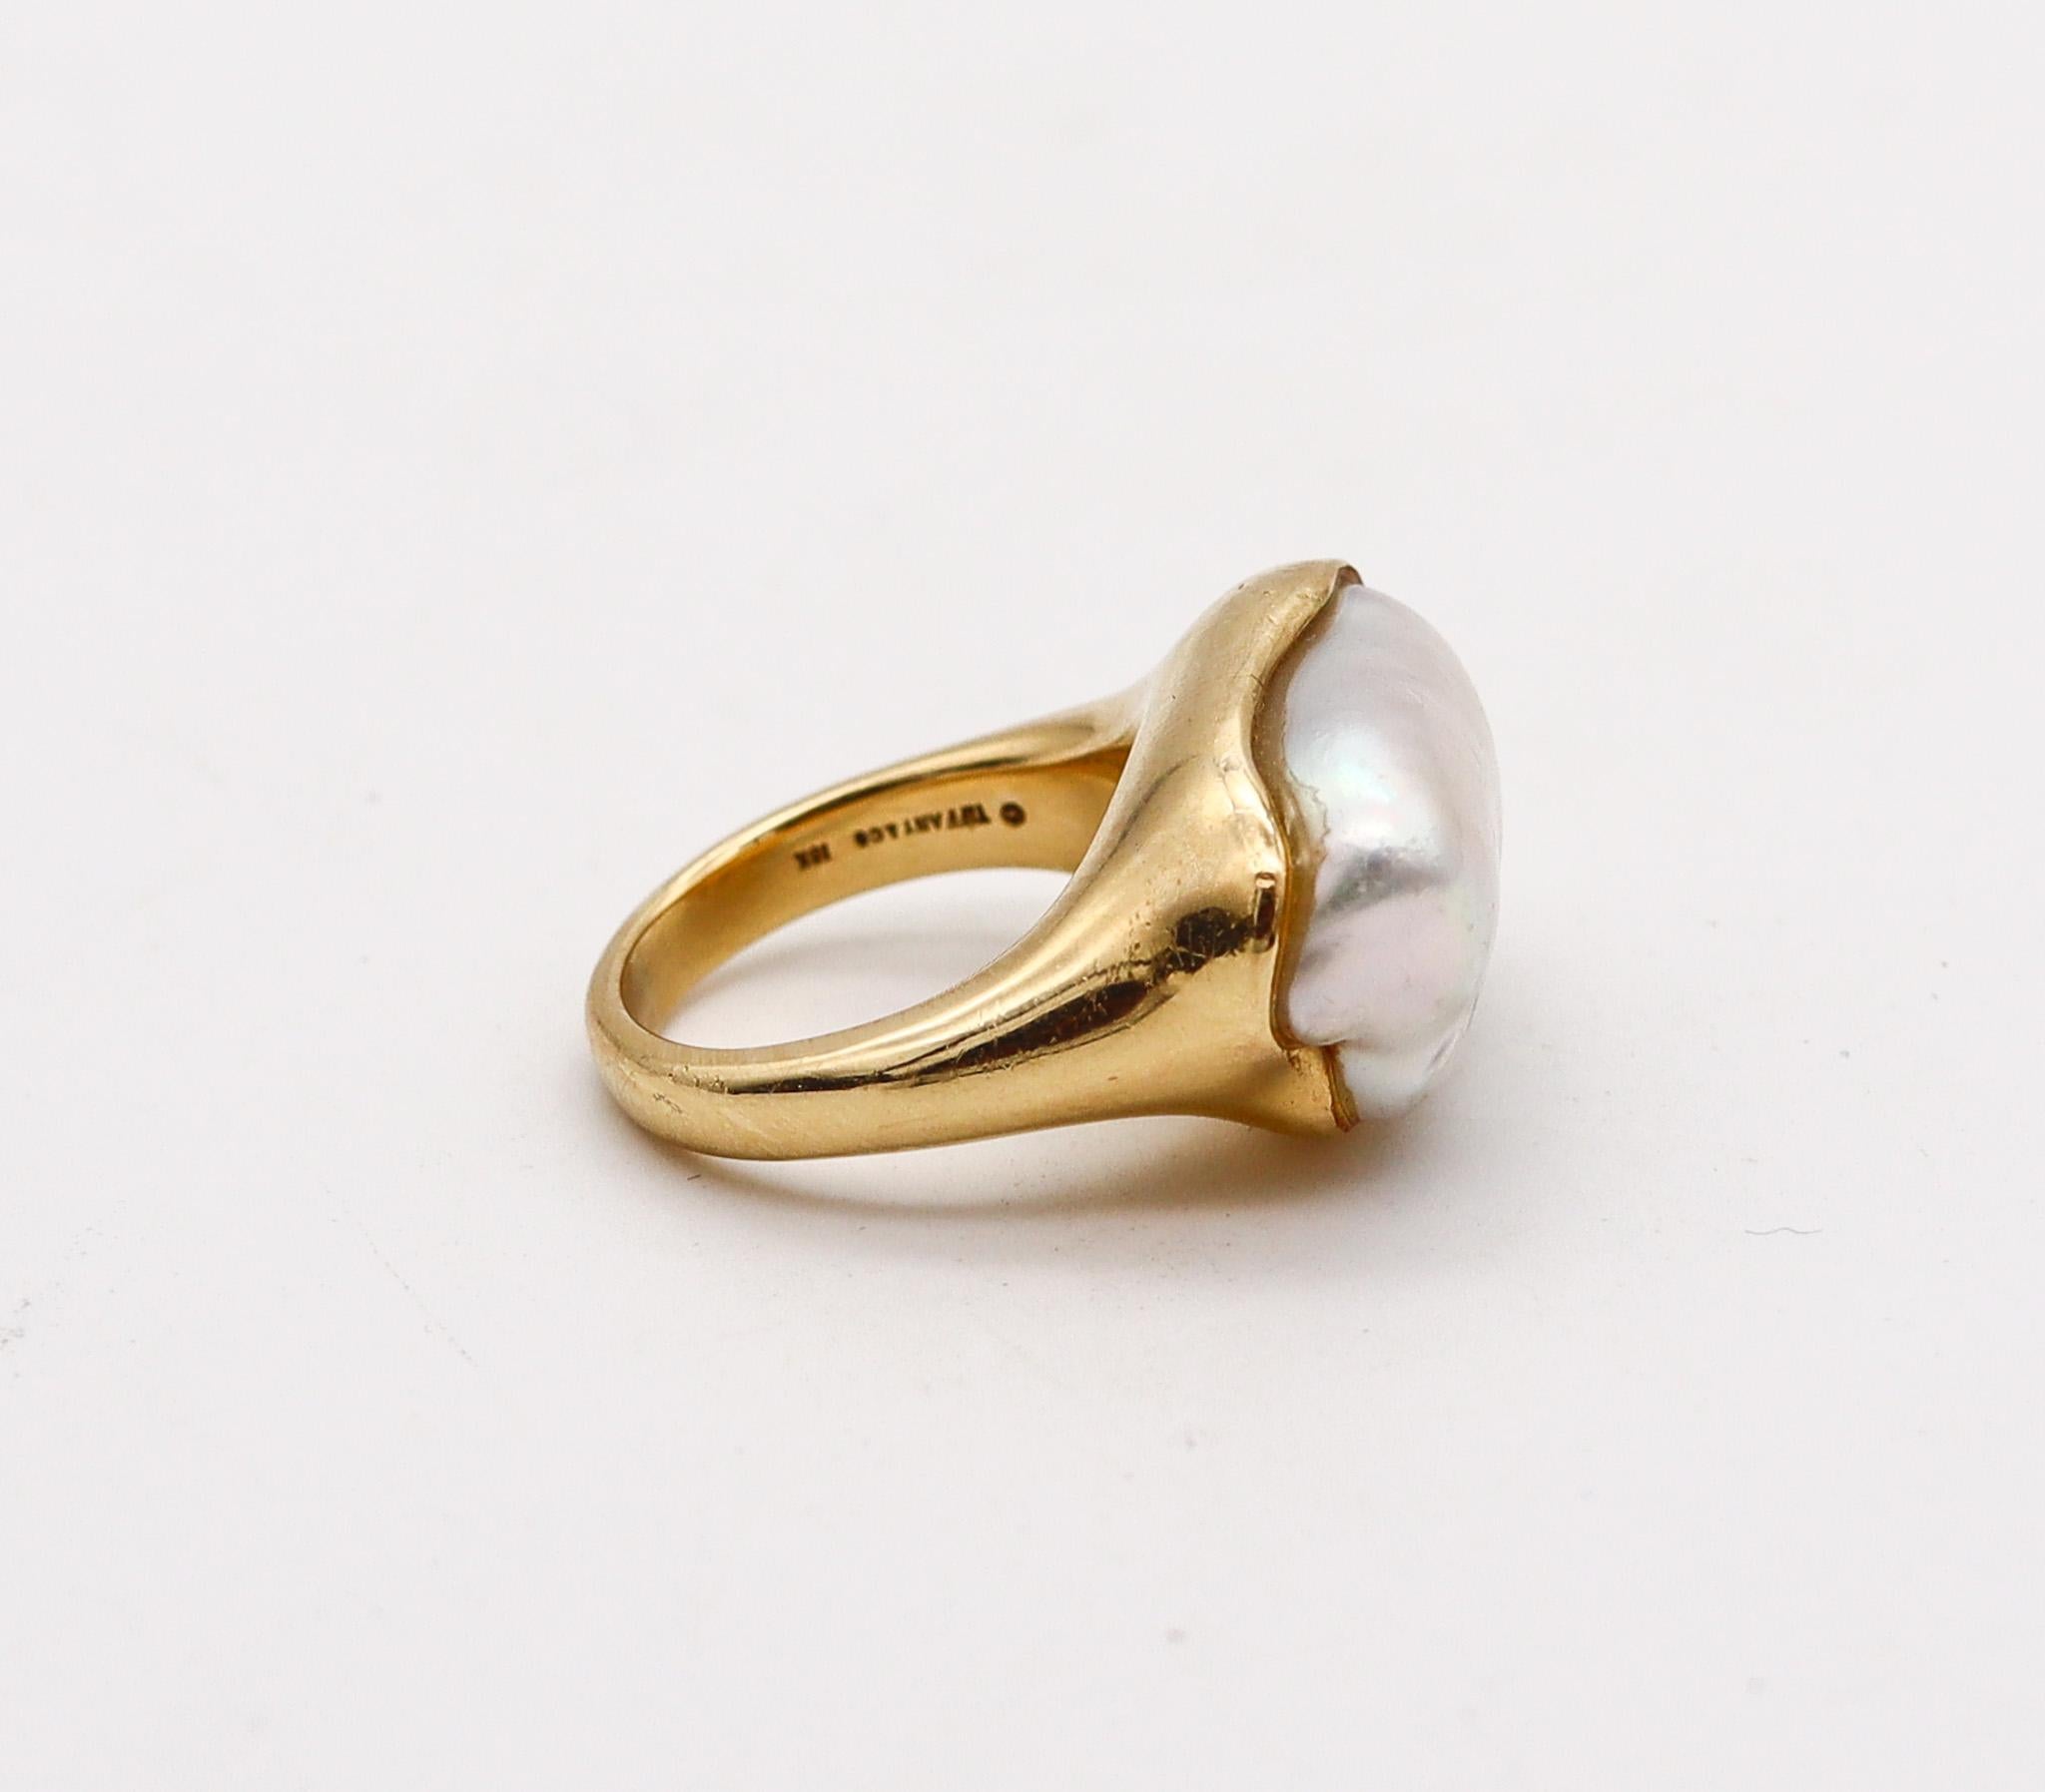 Mixed Cut Tiffany & Co. 1980 Elsa Peretti Cocktail Ring In 18Kt Gold With South Seas Pearl